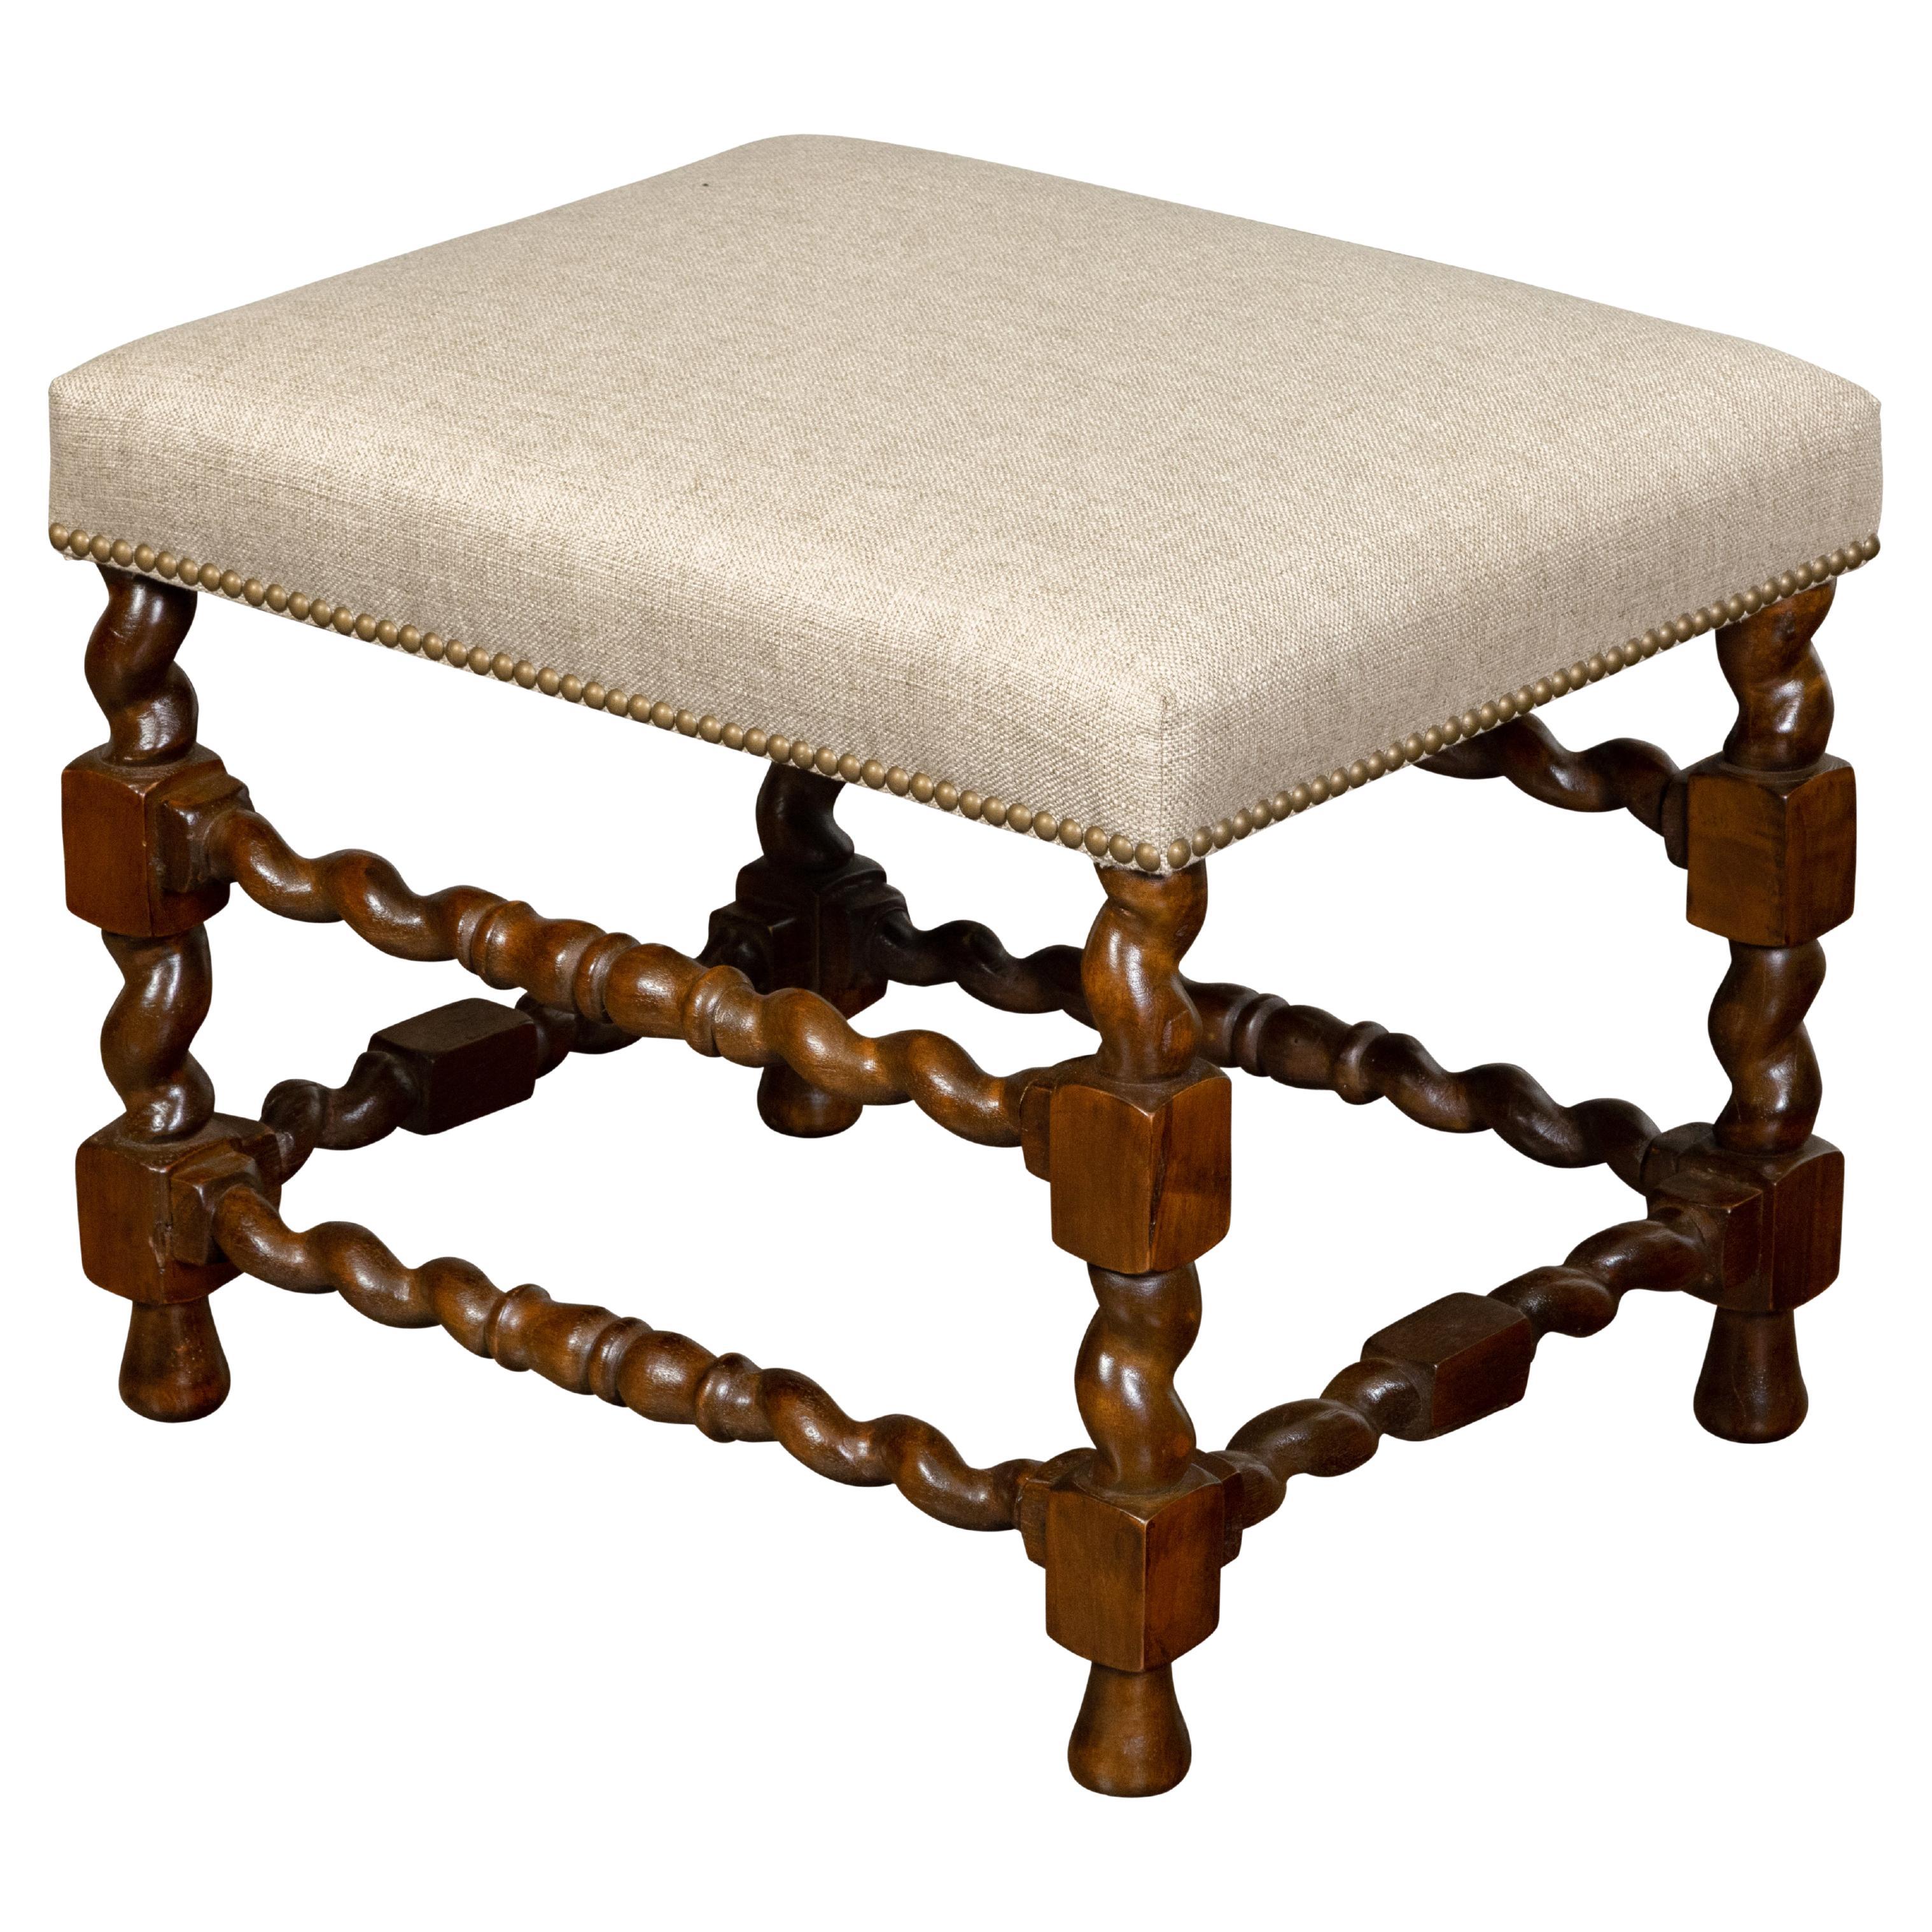 English 19th Century Barley Twist Stool with Linen Upholstery and Brass Nailhead